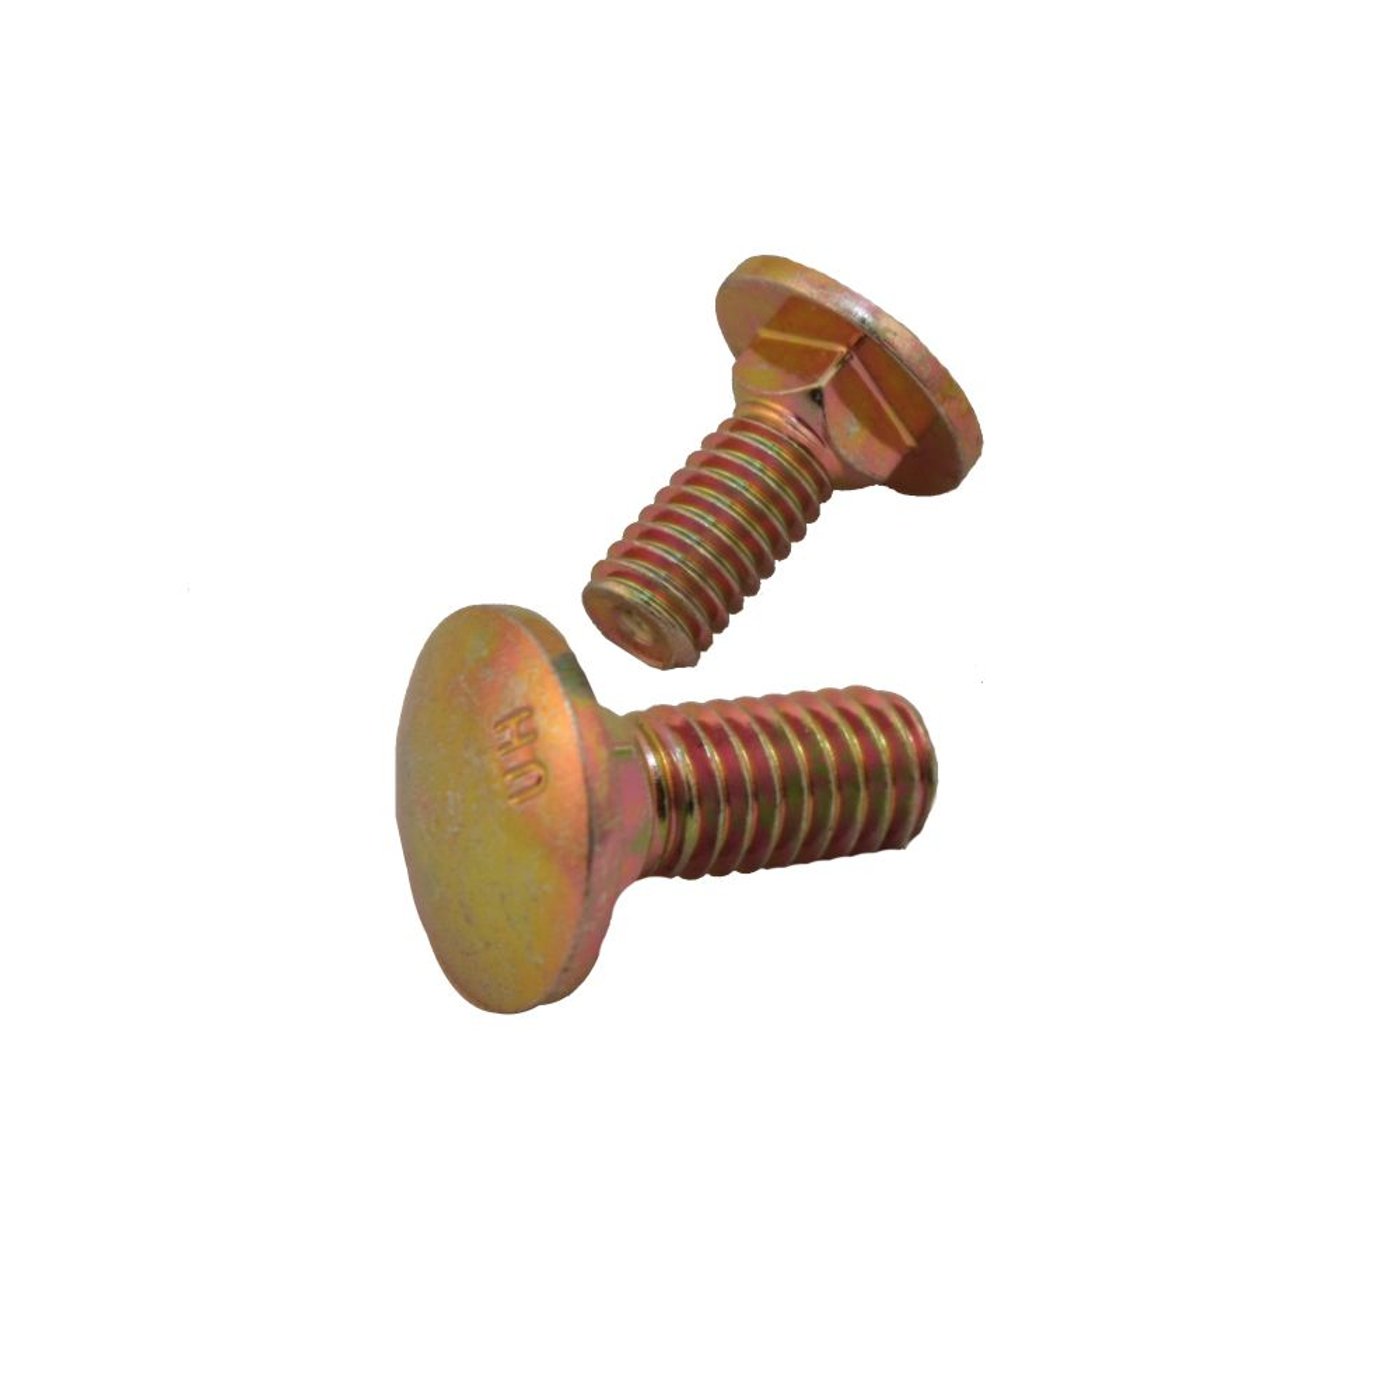 Lawn And Garden Equipment Carriage Bolt Replaces 753 08024 910 0451